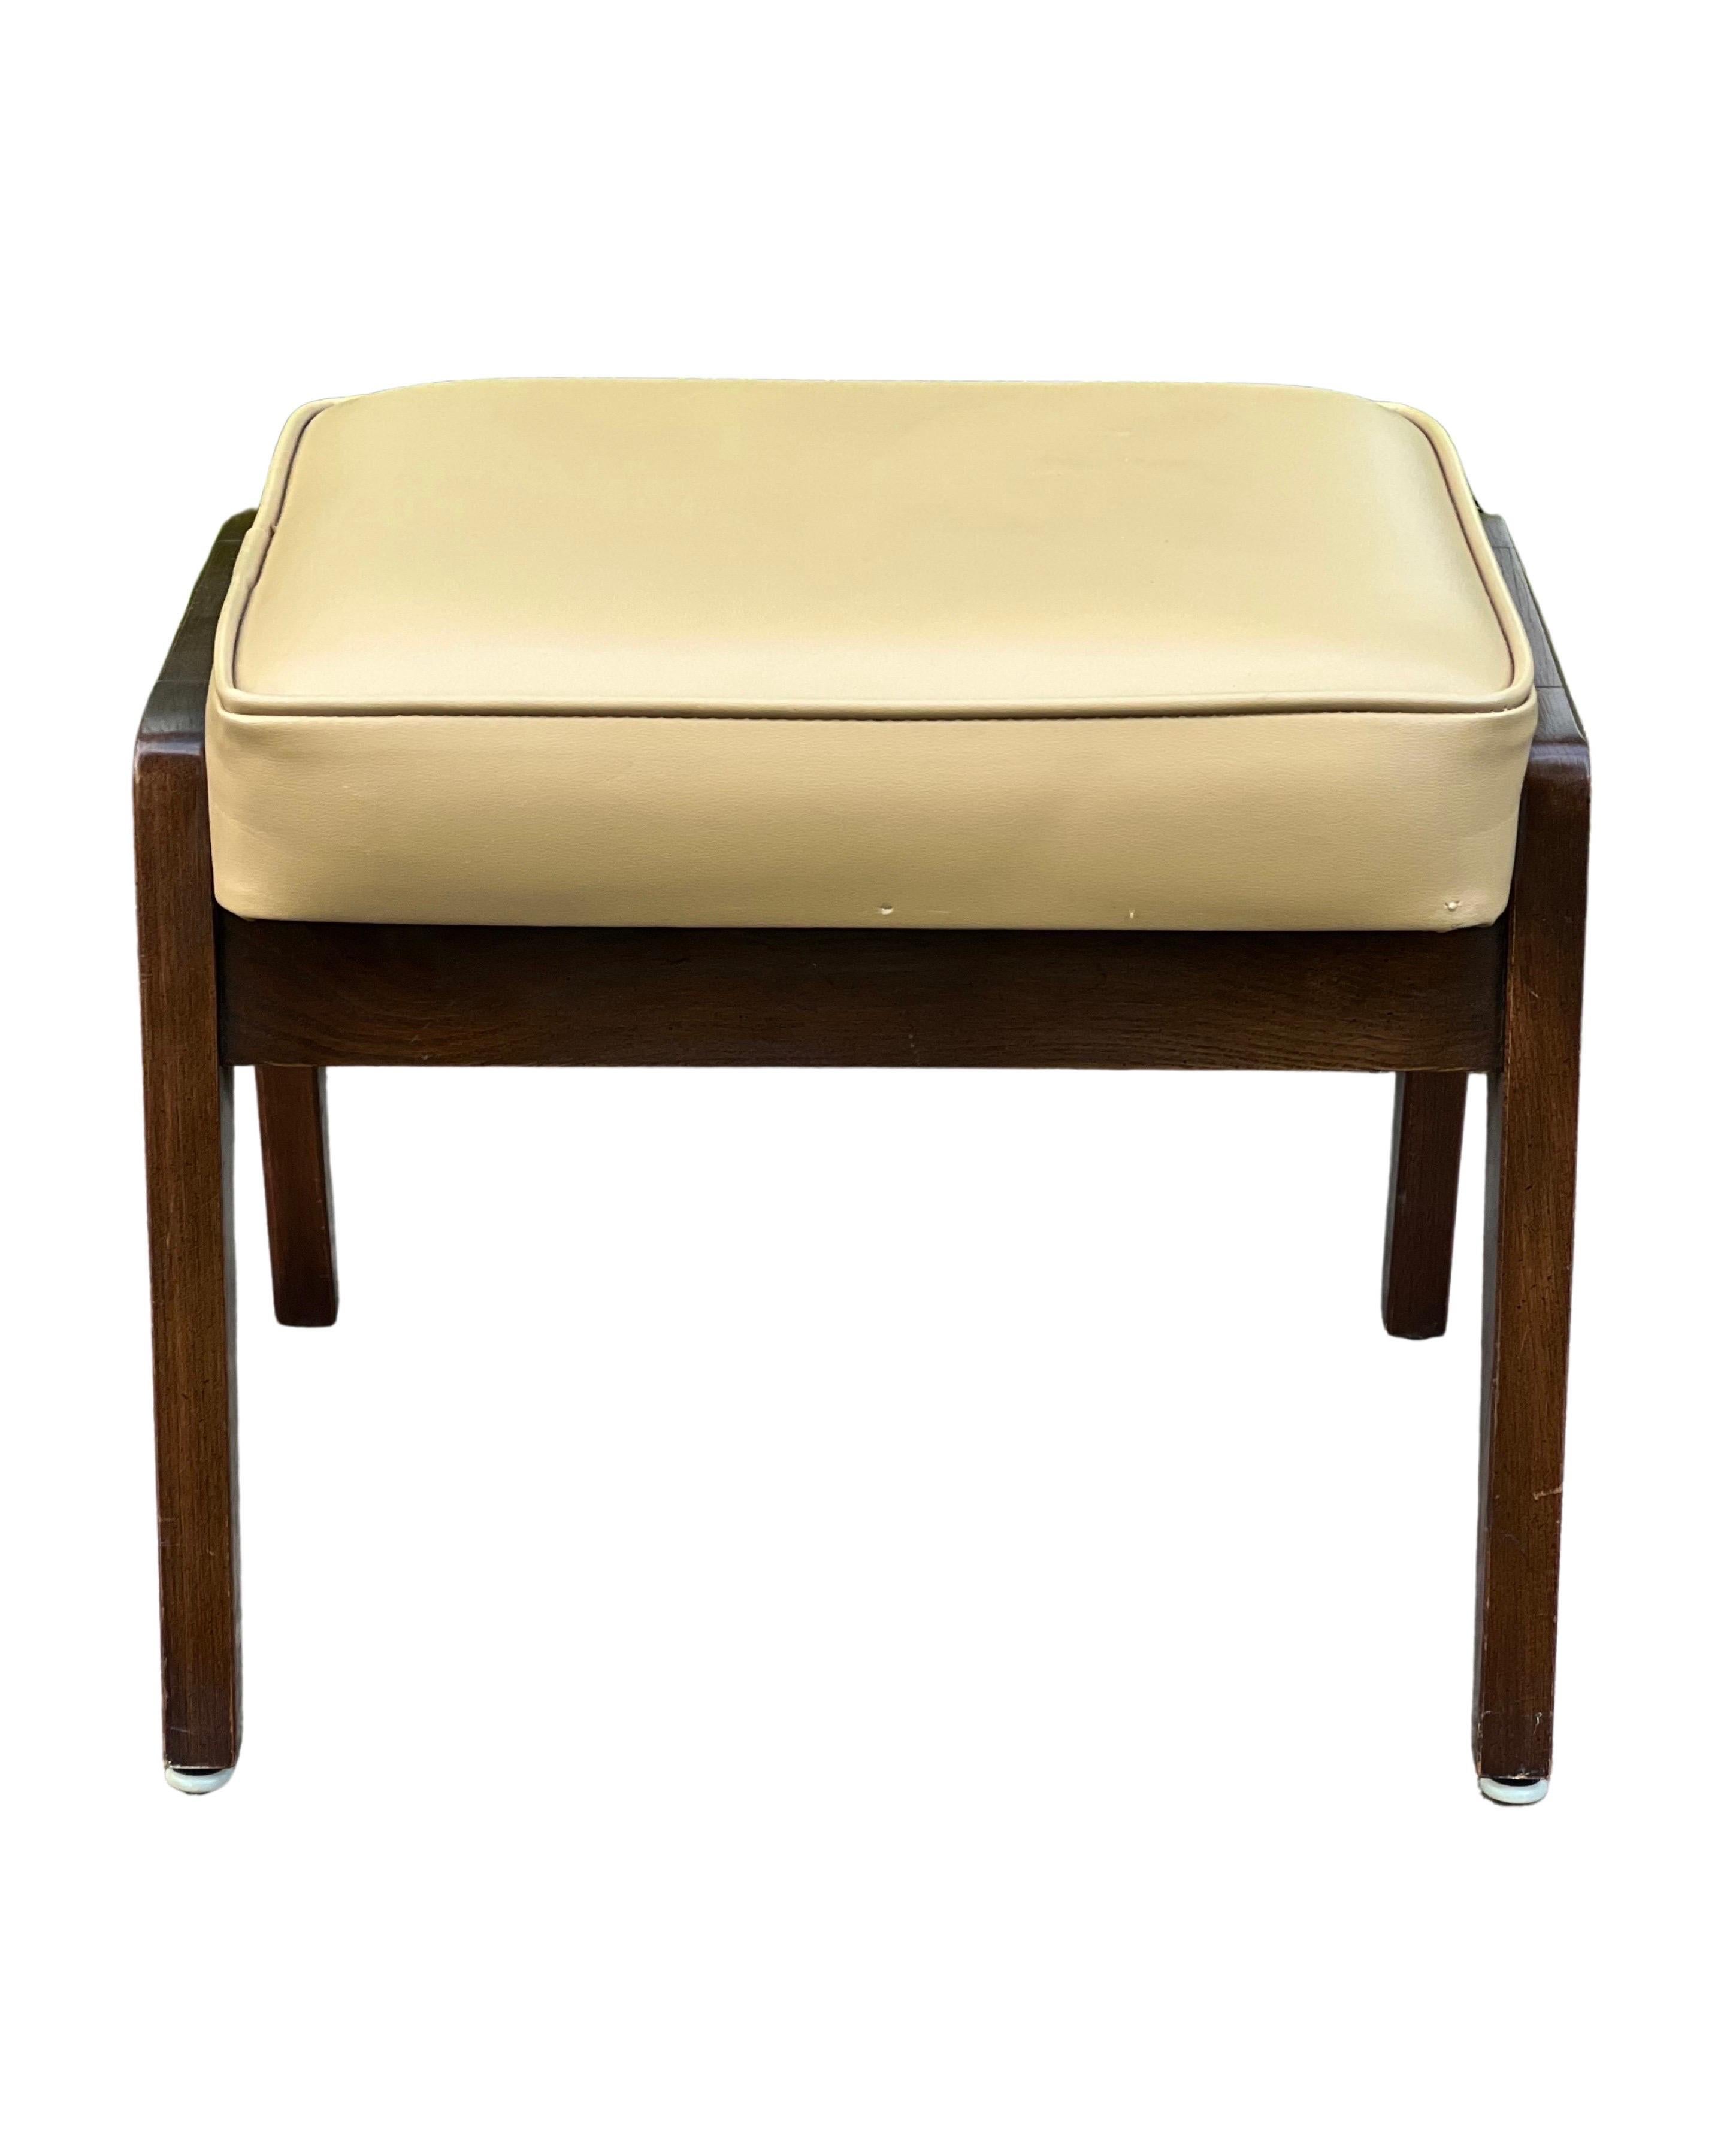 Mid century walnut upholstered footstool, 1950's.

Clean vintage walnut footstool in camel faux leather upholstery with classic mid century modern design. Great for so many uses, whether as extra seating or as a convenient footrest pulled up to a